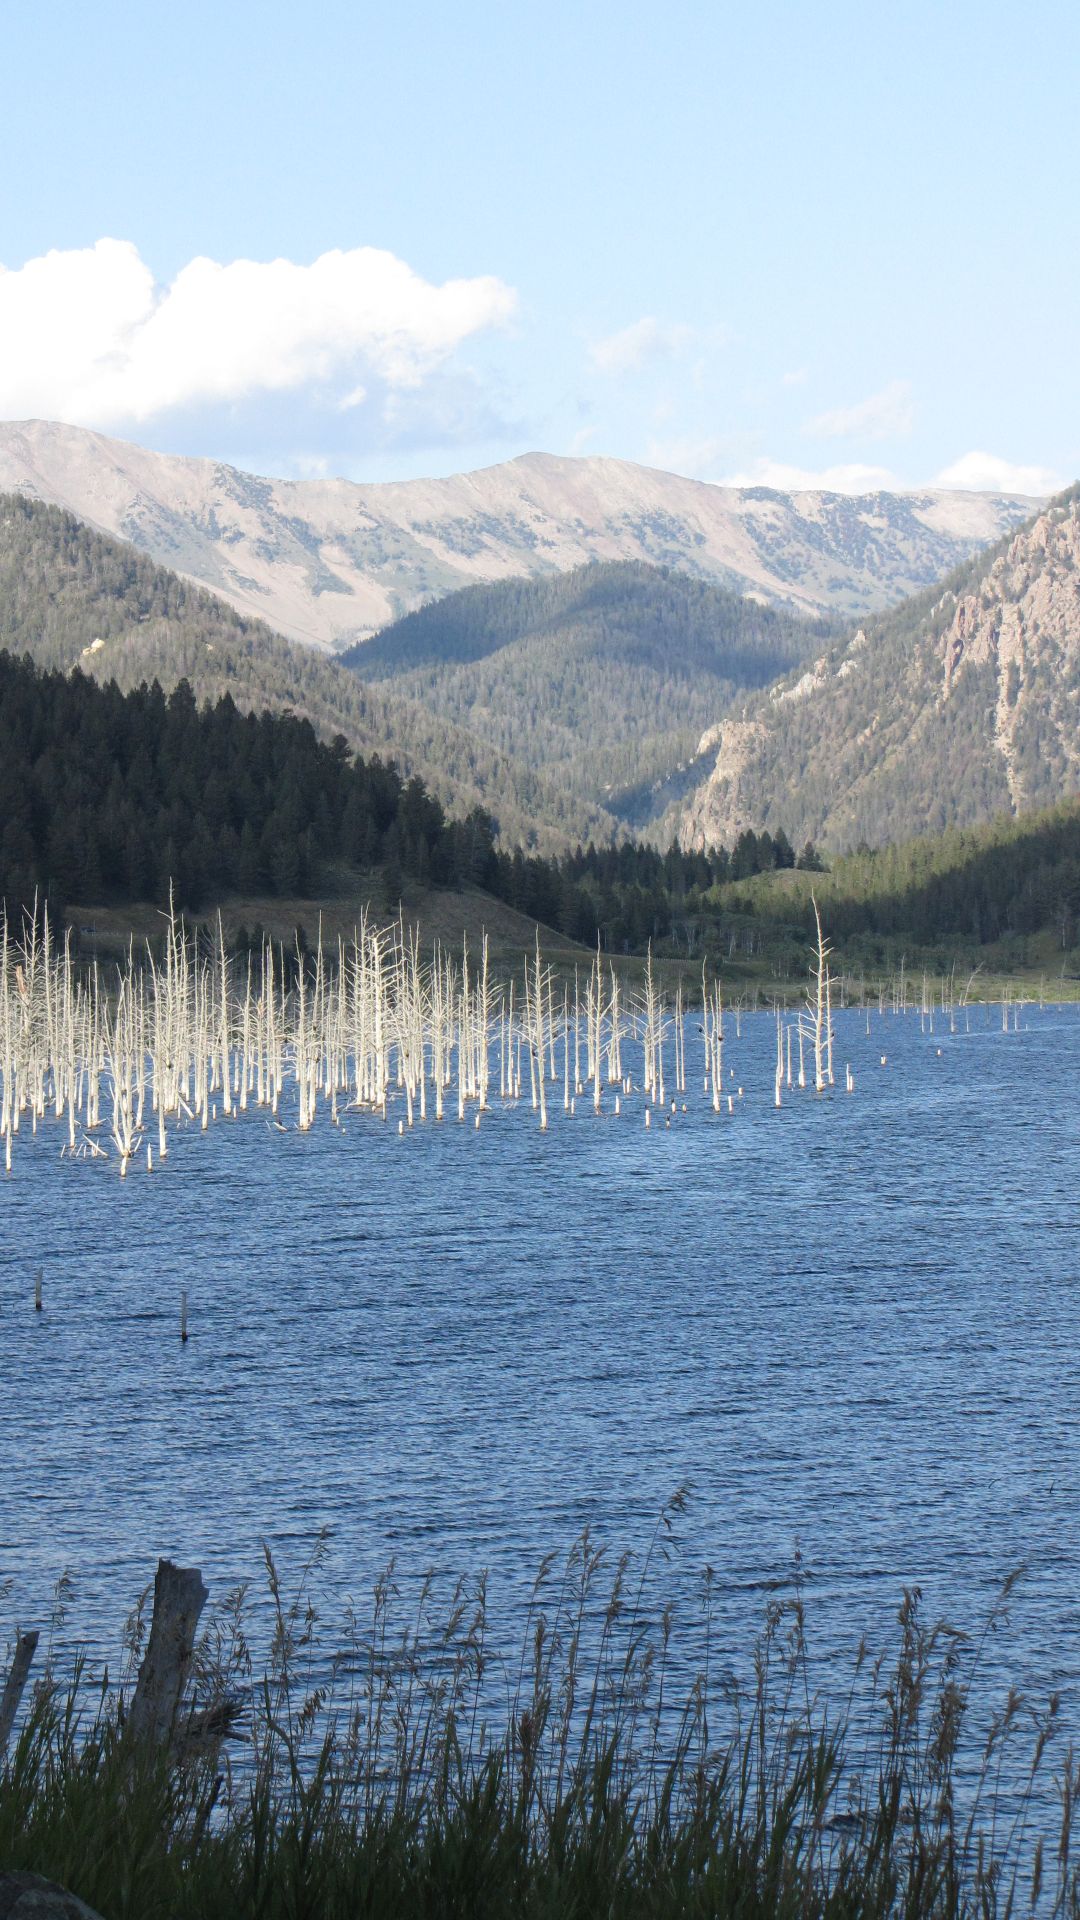 Nr West Yellowstone, MT, USA -"Crater Lake" formed after an earthquake hence the "ghost trees"...